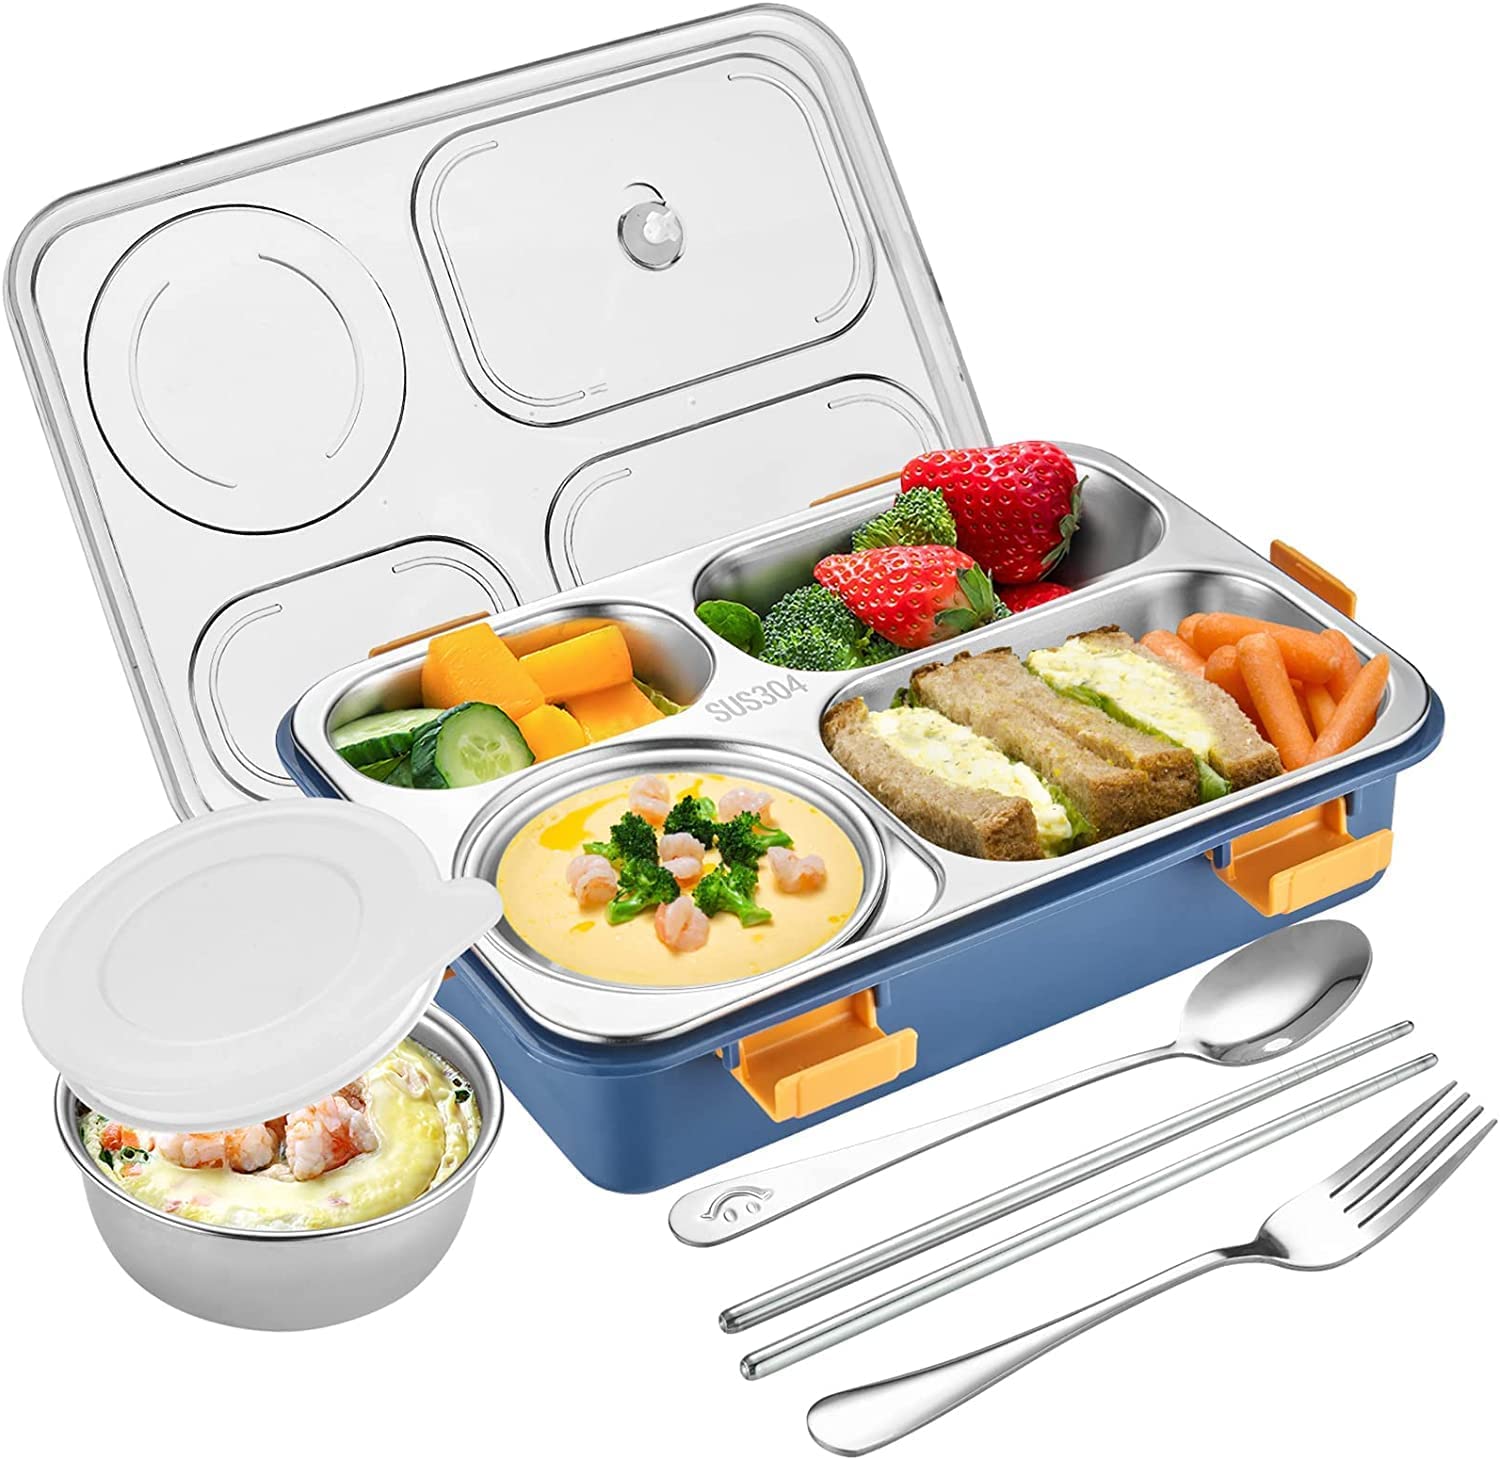 Lunch Boxes for Adults - Lunch Box for Kids with Spoon & Fork - Durable Perfect Size for On-The-Go Meal, BPA-Free (Multi Color) (4 Section)